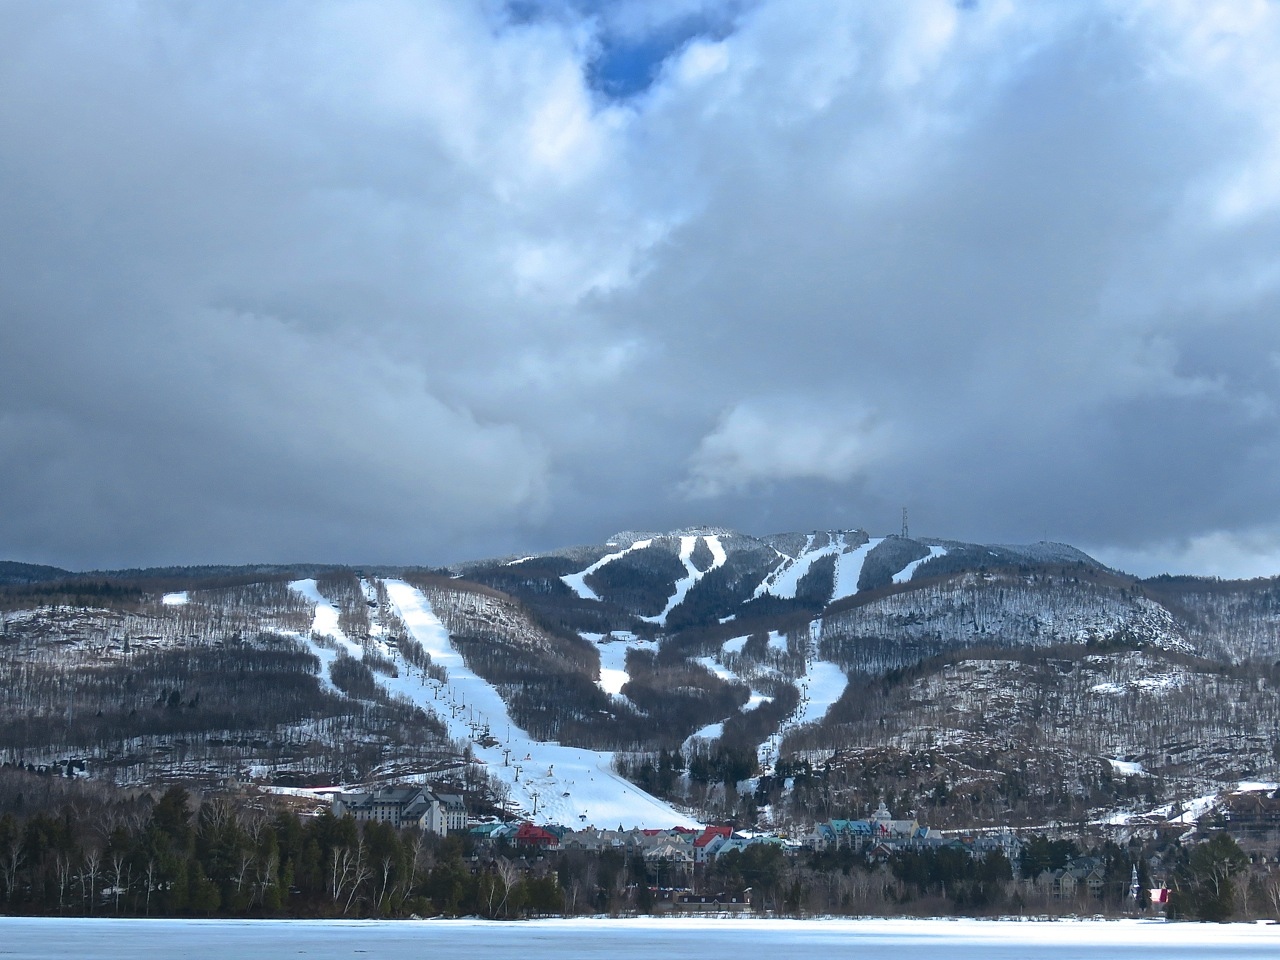 www.Tremblant360.com photo. All rights reserved.